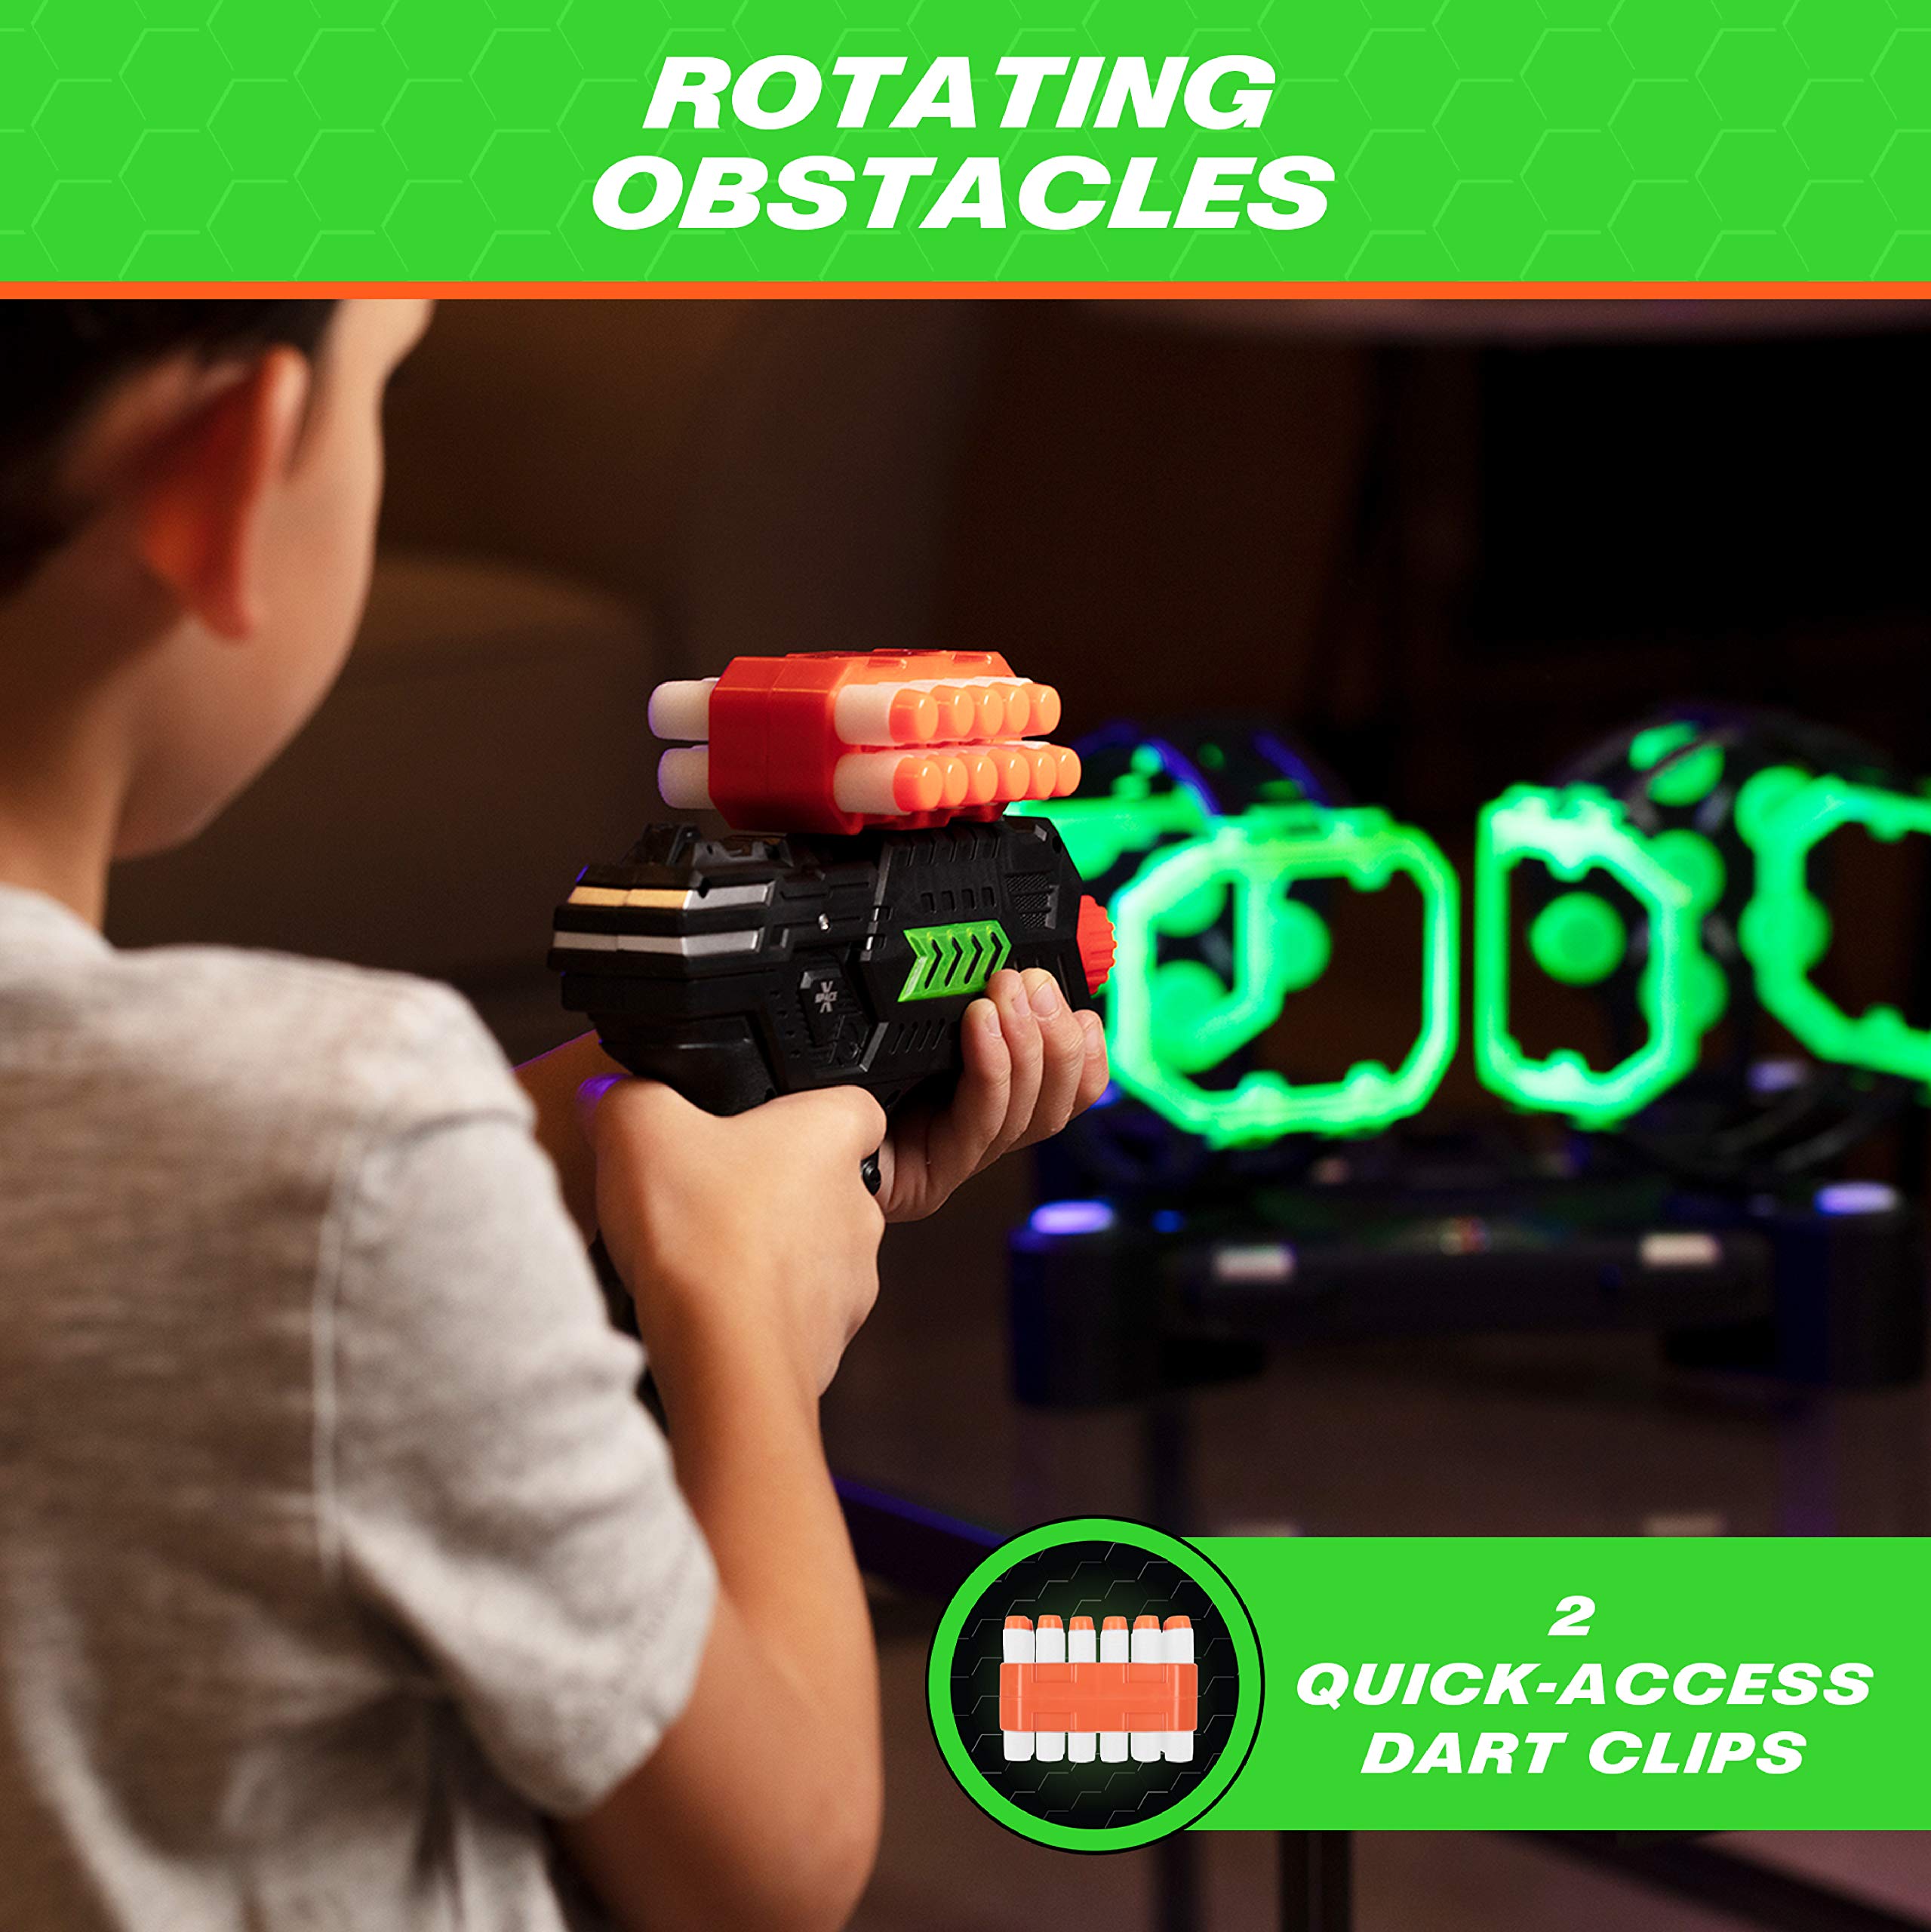 USA Toyz Astroshot Gyro Glow Rotating Shooting Games for Kids - Nerf Compatible Spinning Shooting Targets, Kids Shooting Game, 2 Toy Guns for Boys and Girls, 14 Targets, 24 Foam Darts, 2 Dart Holders